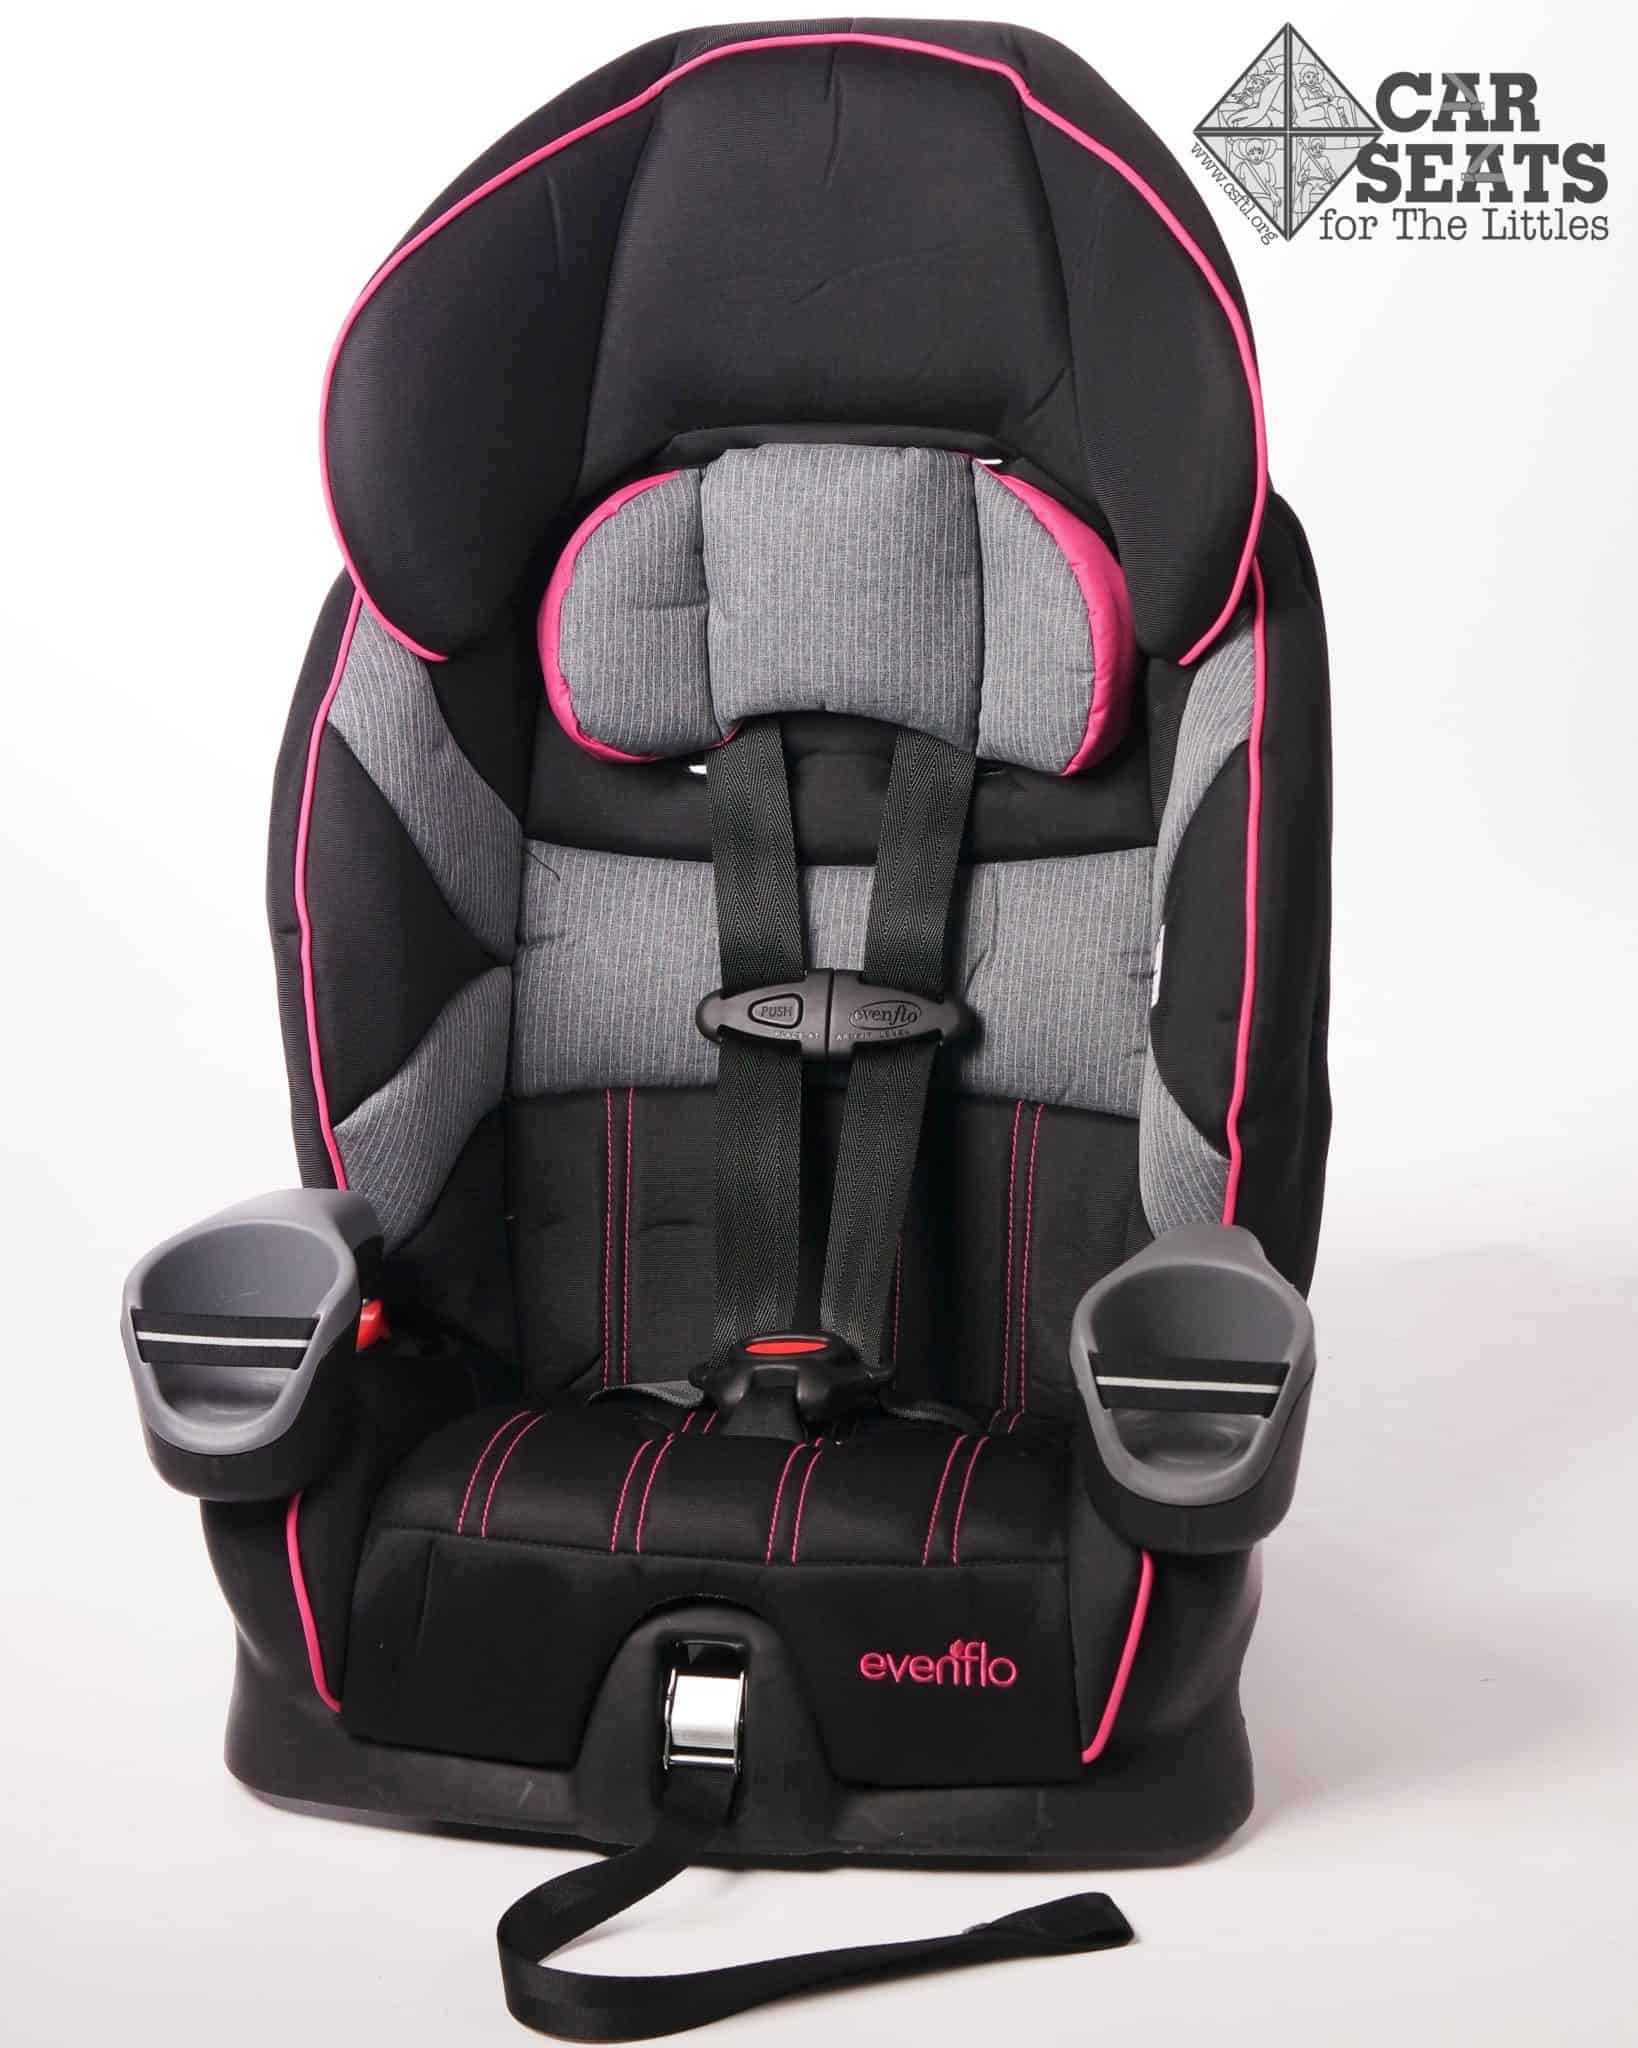 How do you find an Evenflo car seat manual?